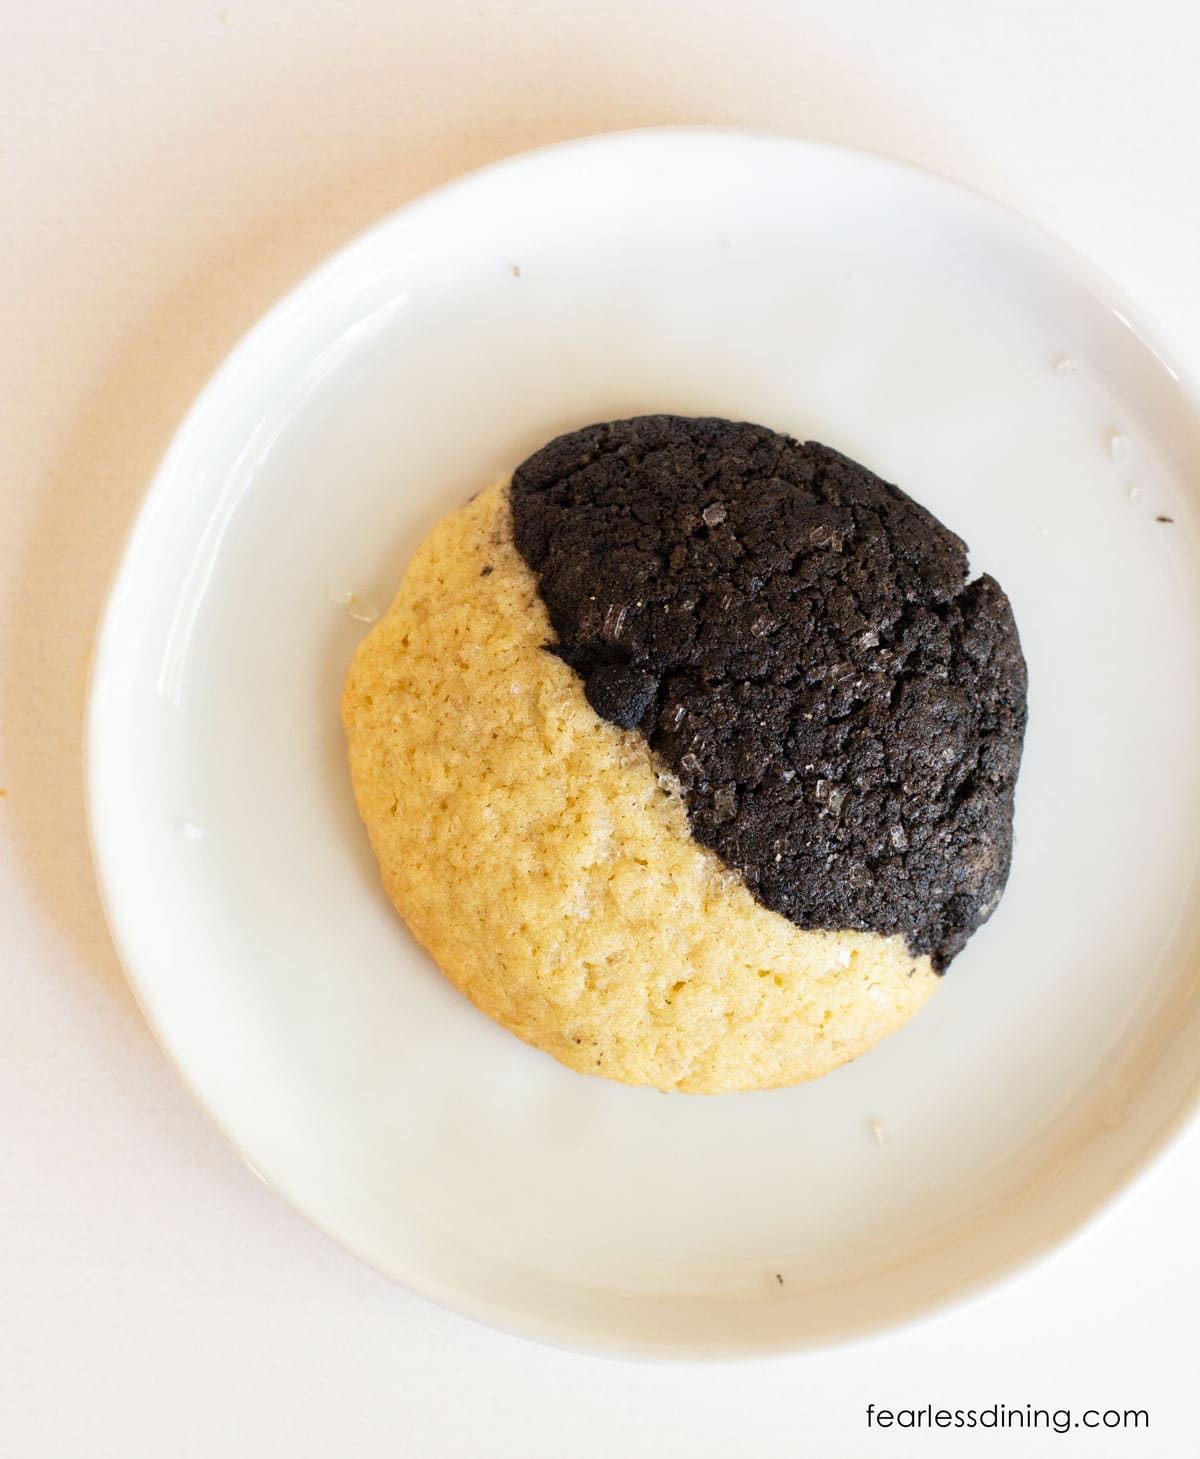 A half chocolate half vanilla cookie on a small white plate.